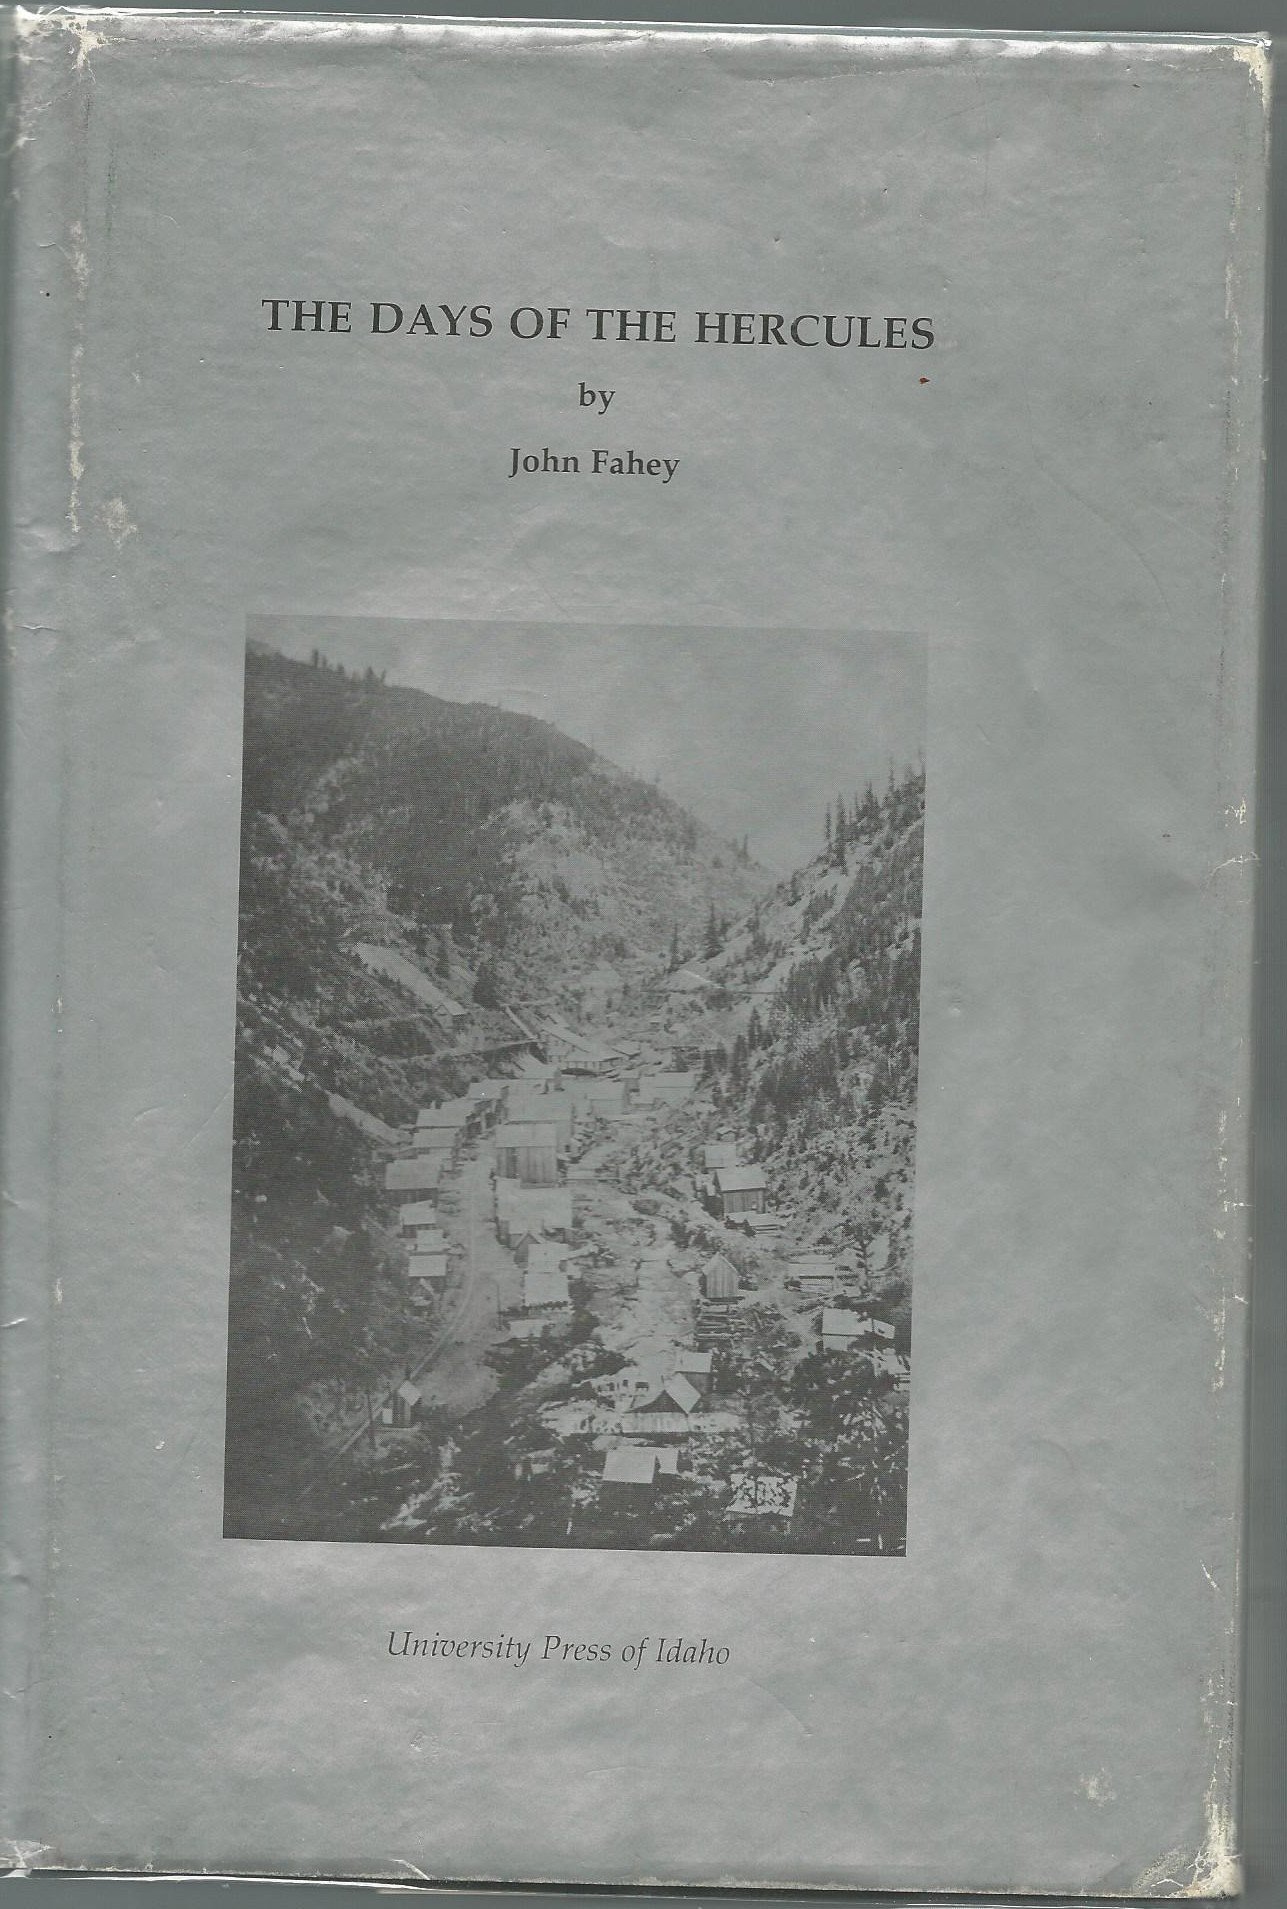 The Days of the Hercules (book cover)